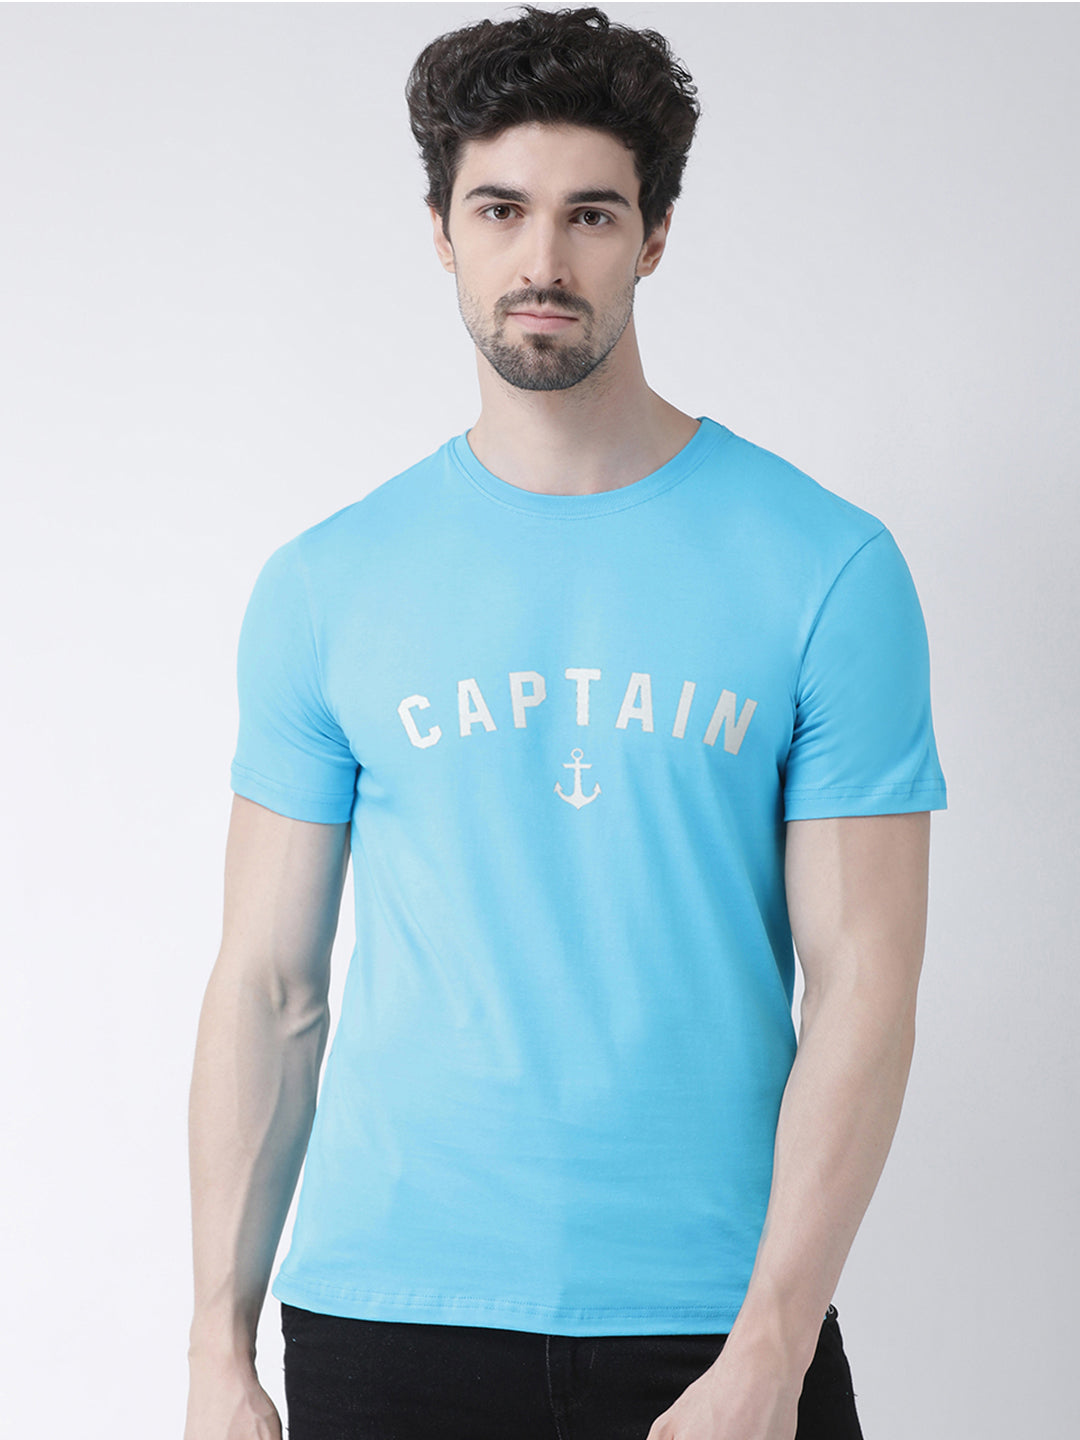 Captain Printed Half Sleeves Round Neck T-shirt - Friskers